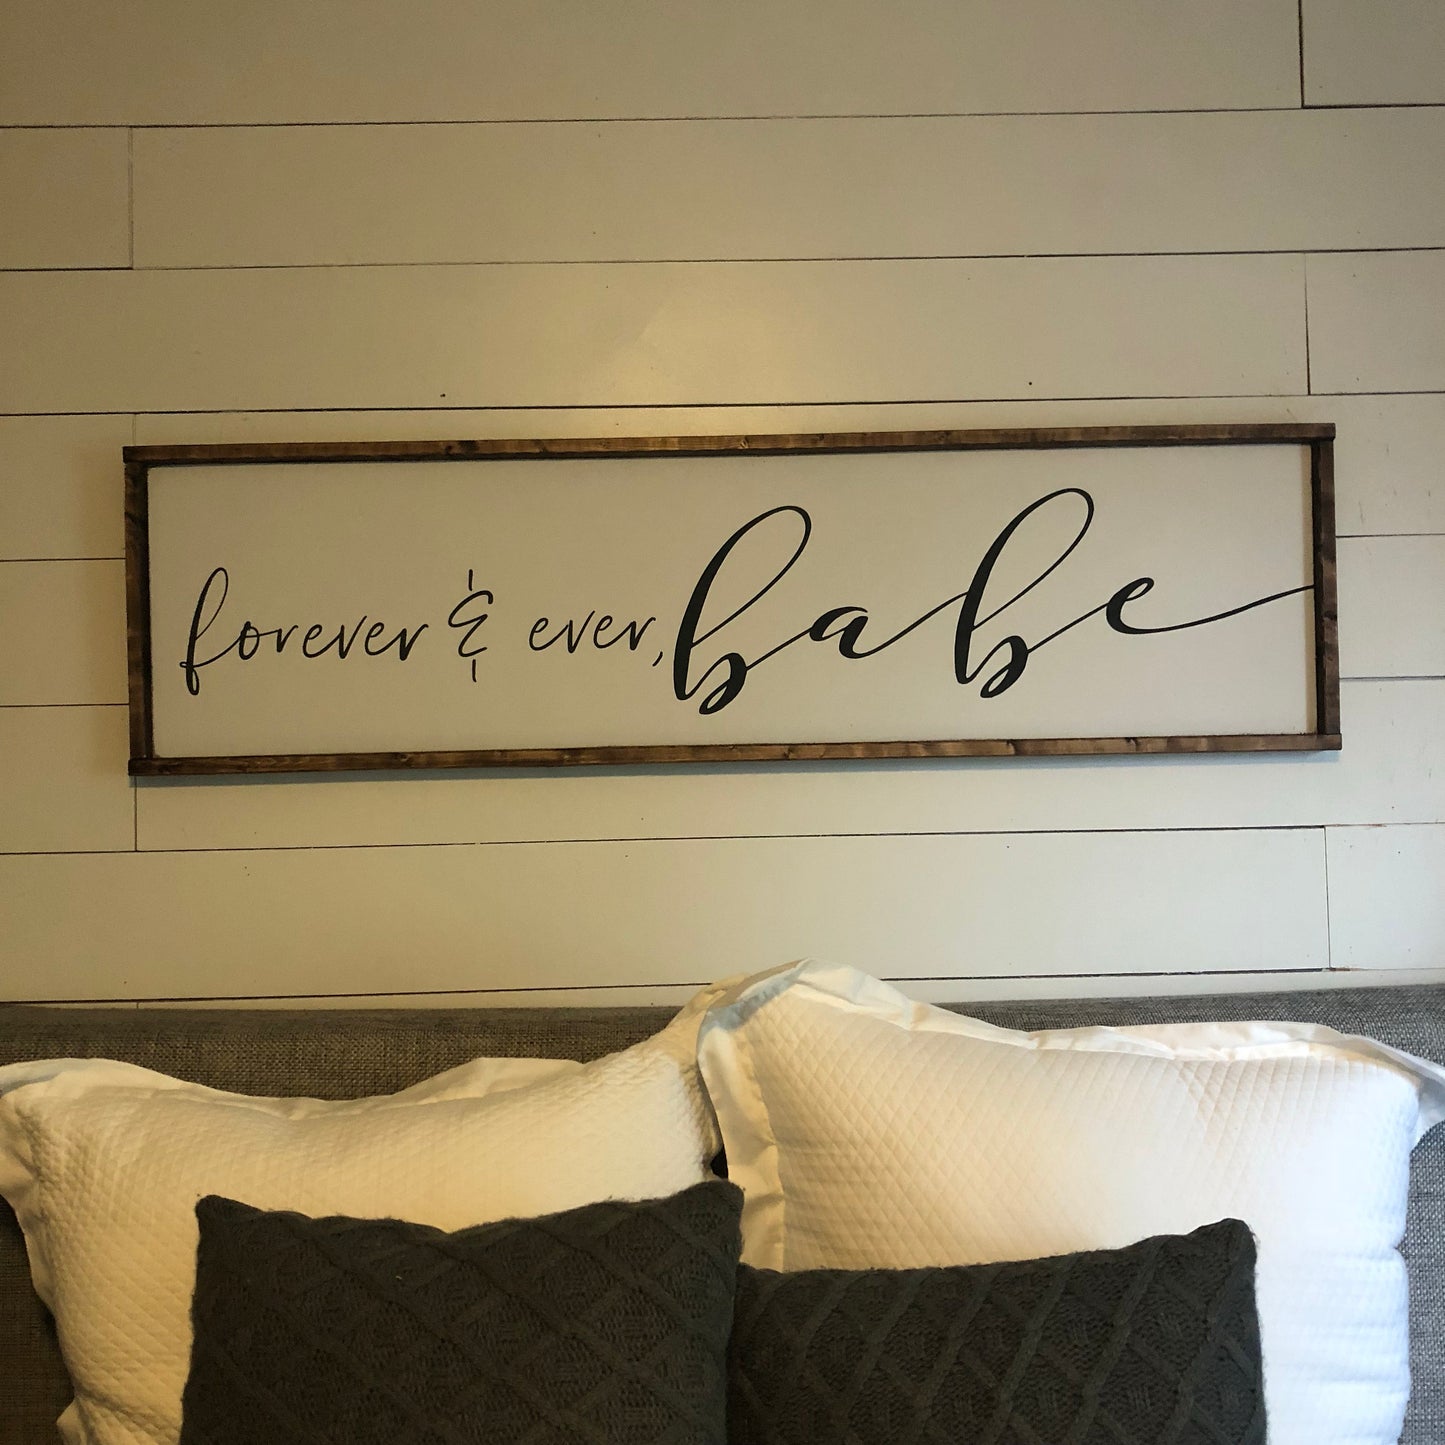 forever & ever, babe. - above over the bed sign - master bedroom wall art [FREE SHIPPING!]